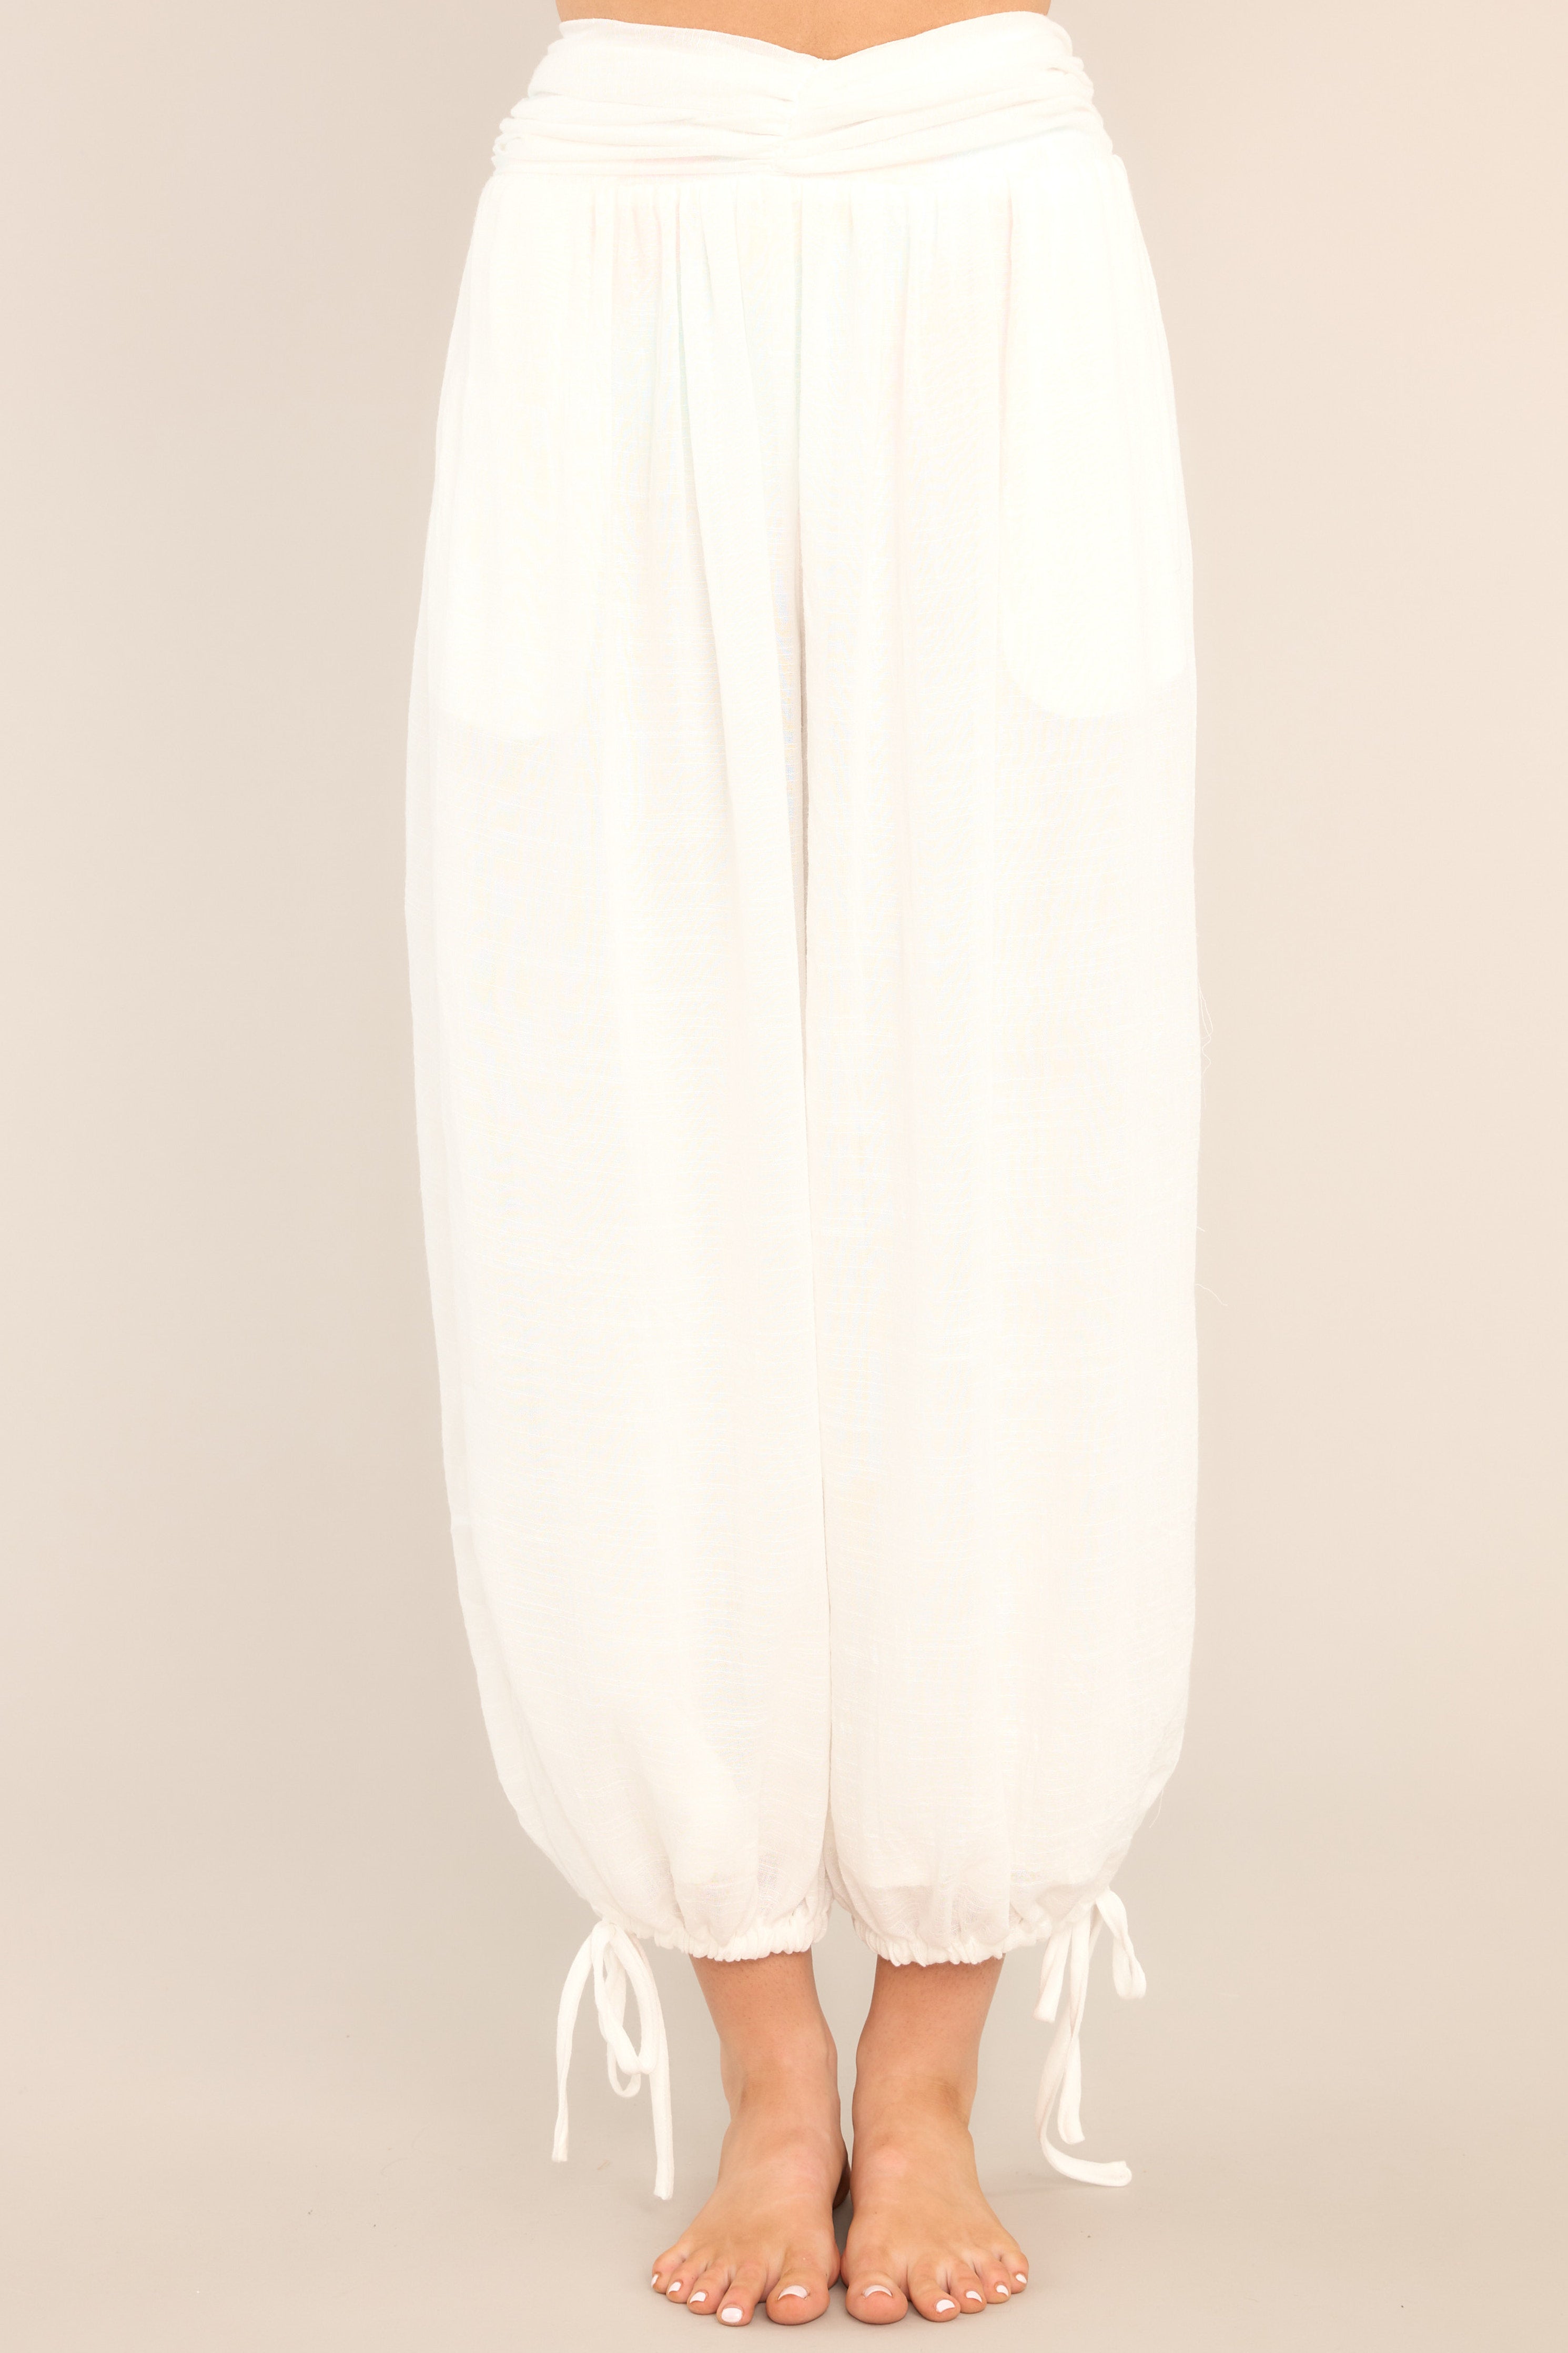 Front view of these pants that feature a high waisted design with cinching in the middle, a smocked insert in the back, functional hip pockets, a linen-like material, and self-tie drawstring cuffed ankles. 